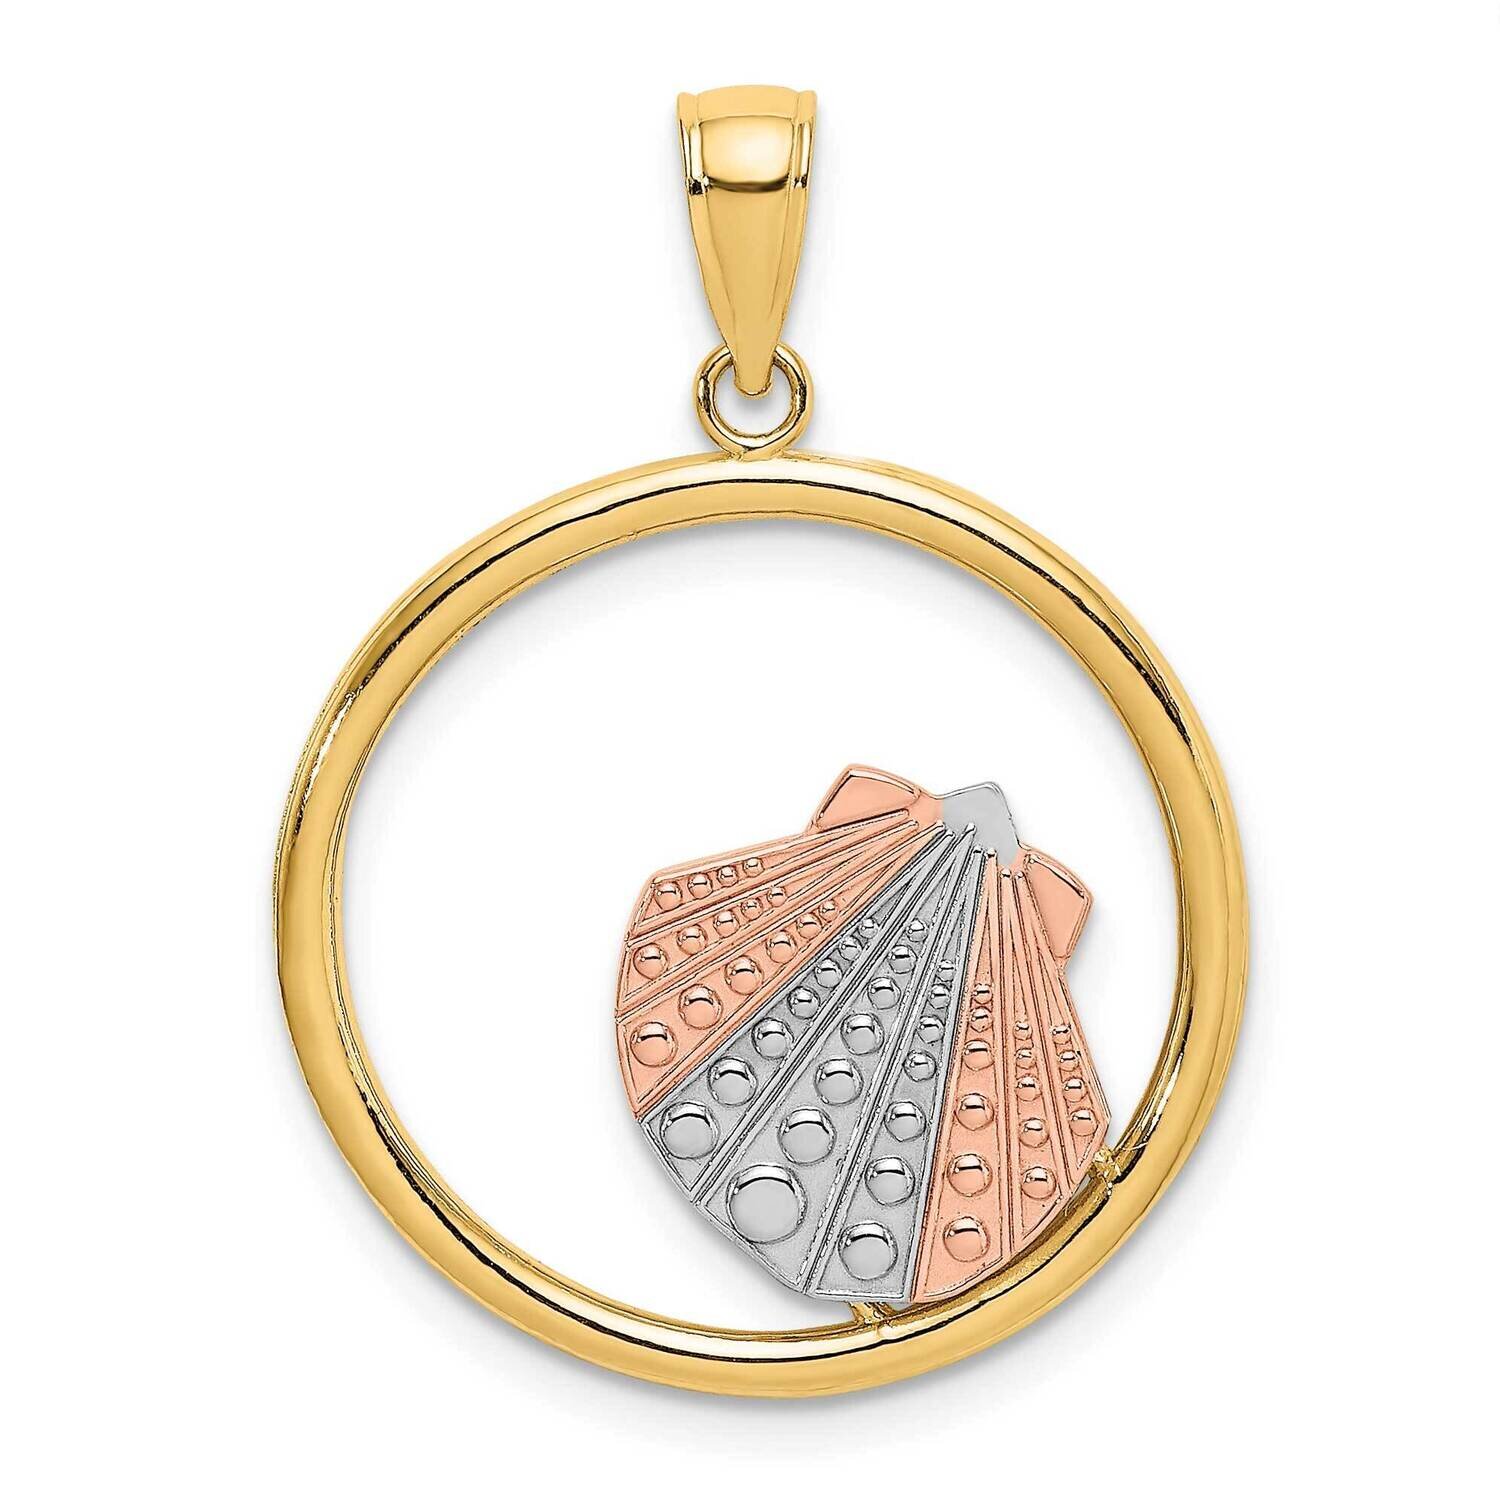 Scallop Shell In Round Frame Charm 14k Tri-Color Gold K9426